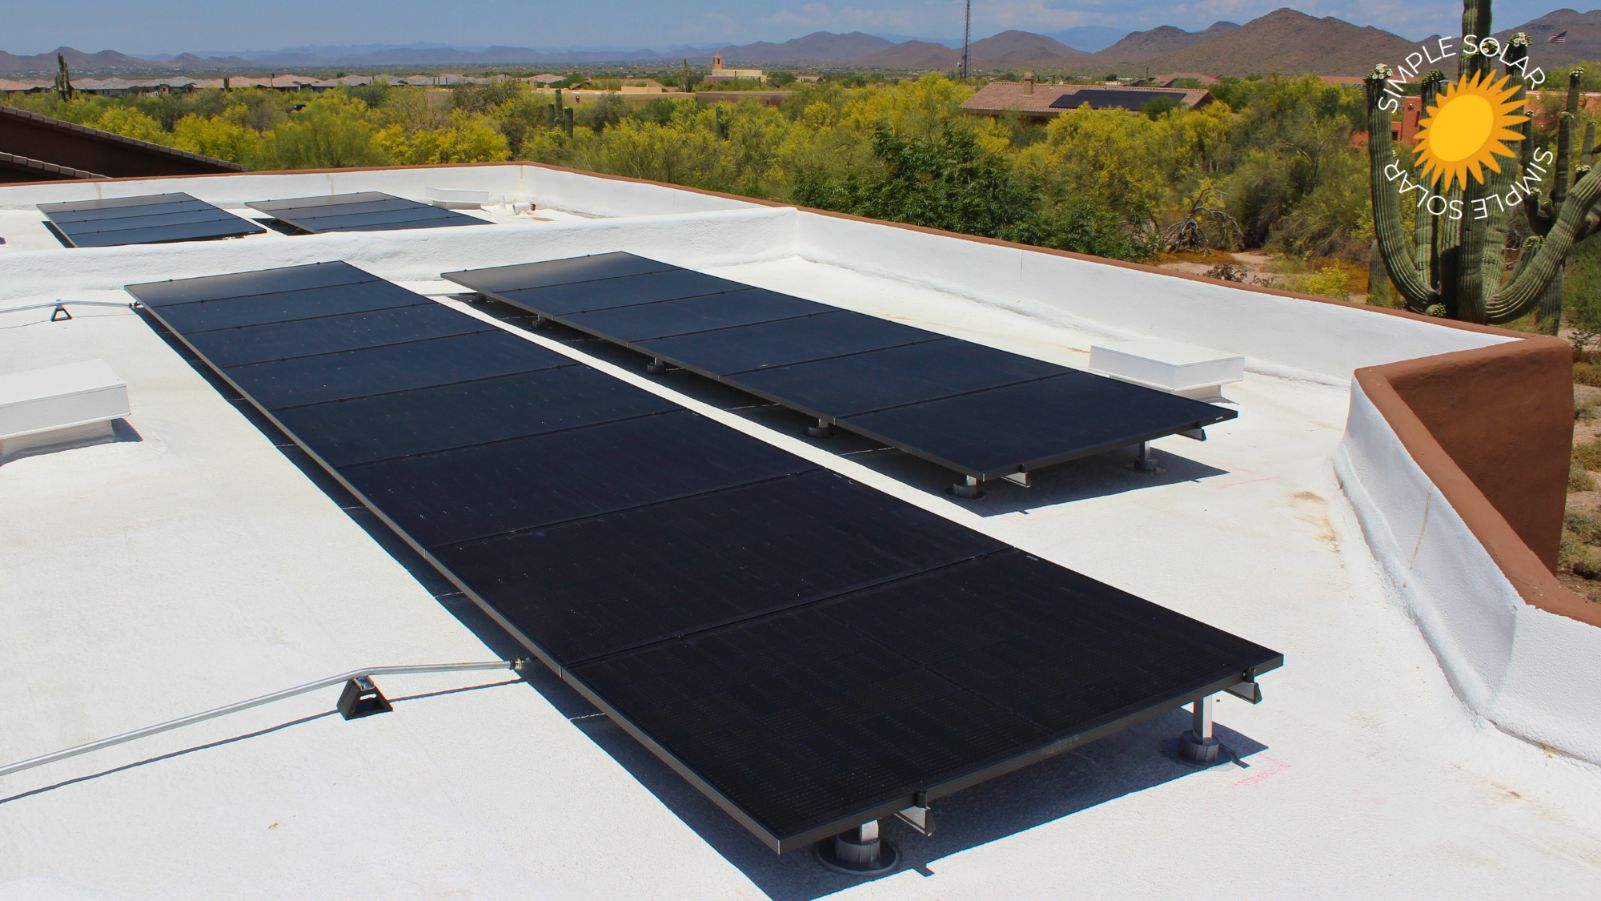 6 Questions to Have Before Going Solar